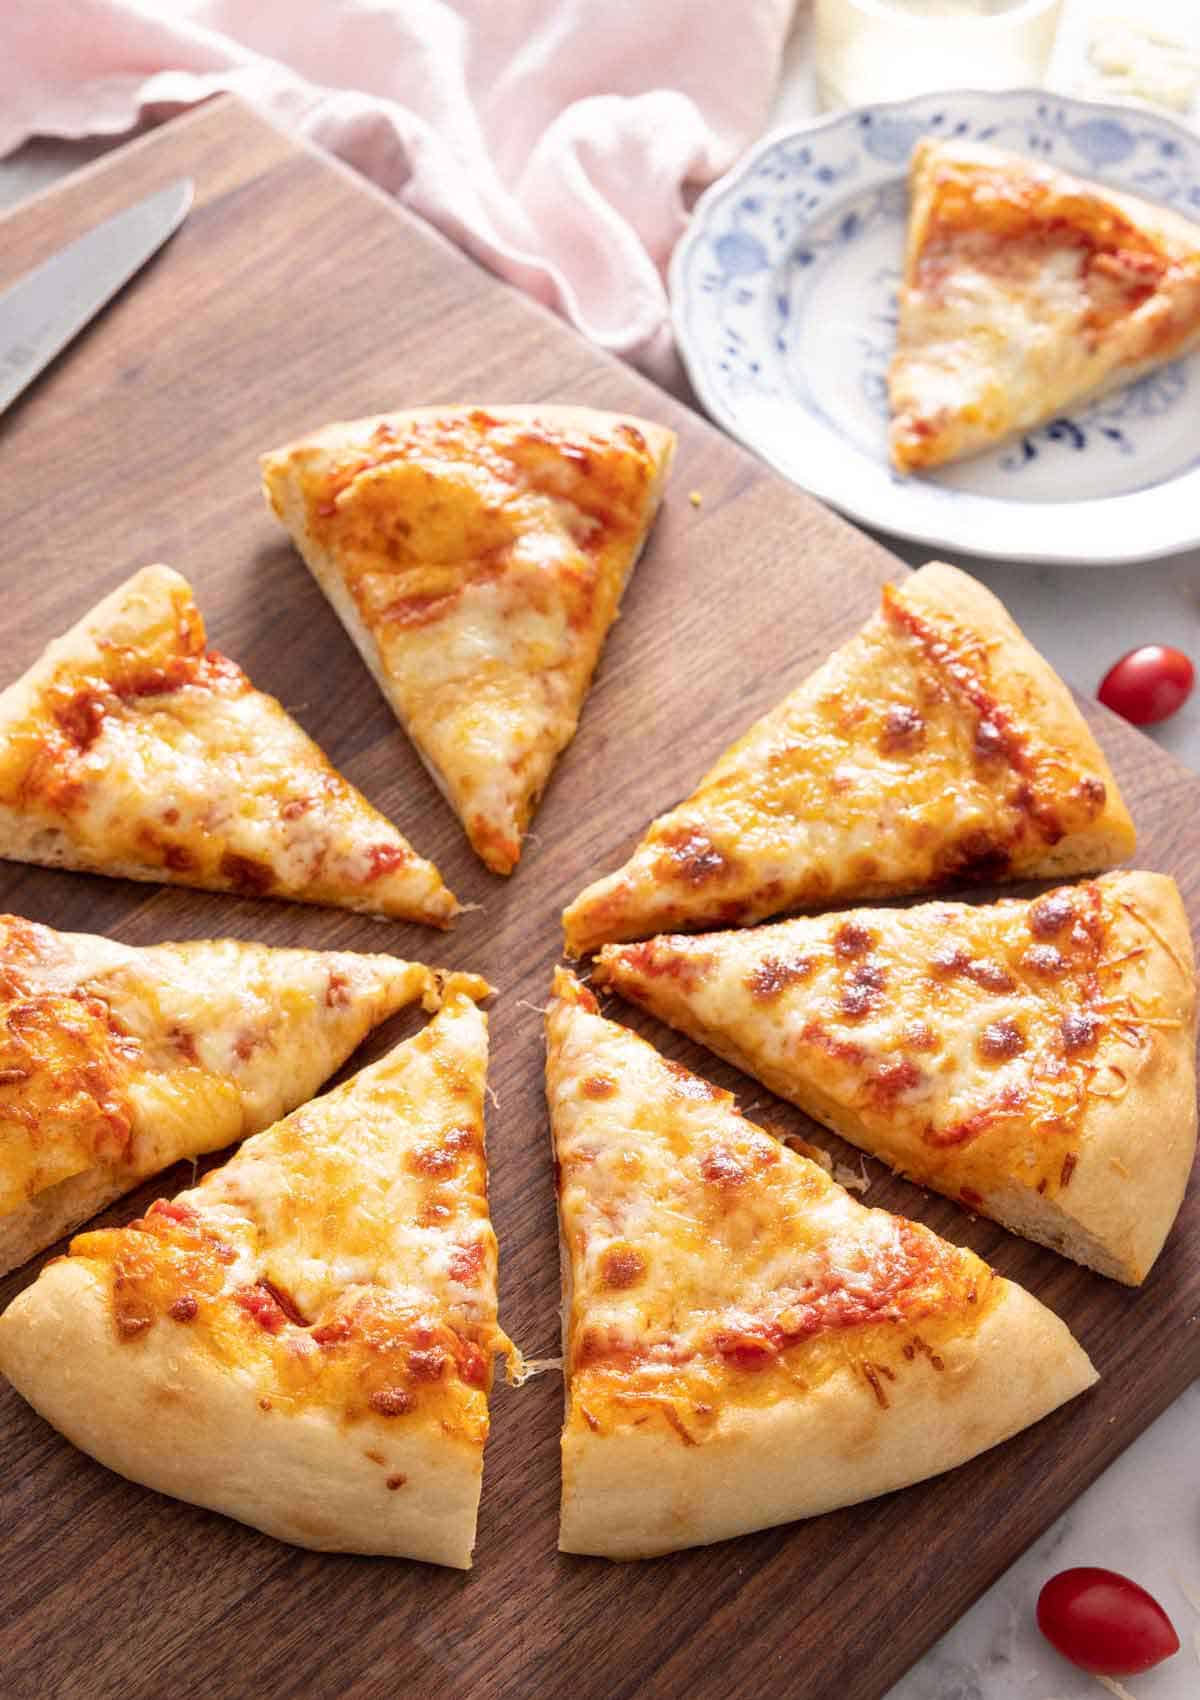 A cheese pizza sliced into 8 slices with 1 slice on a plate.